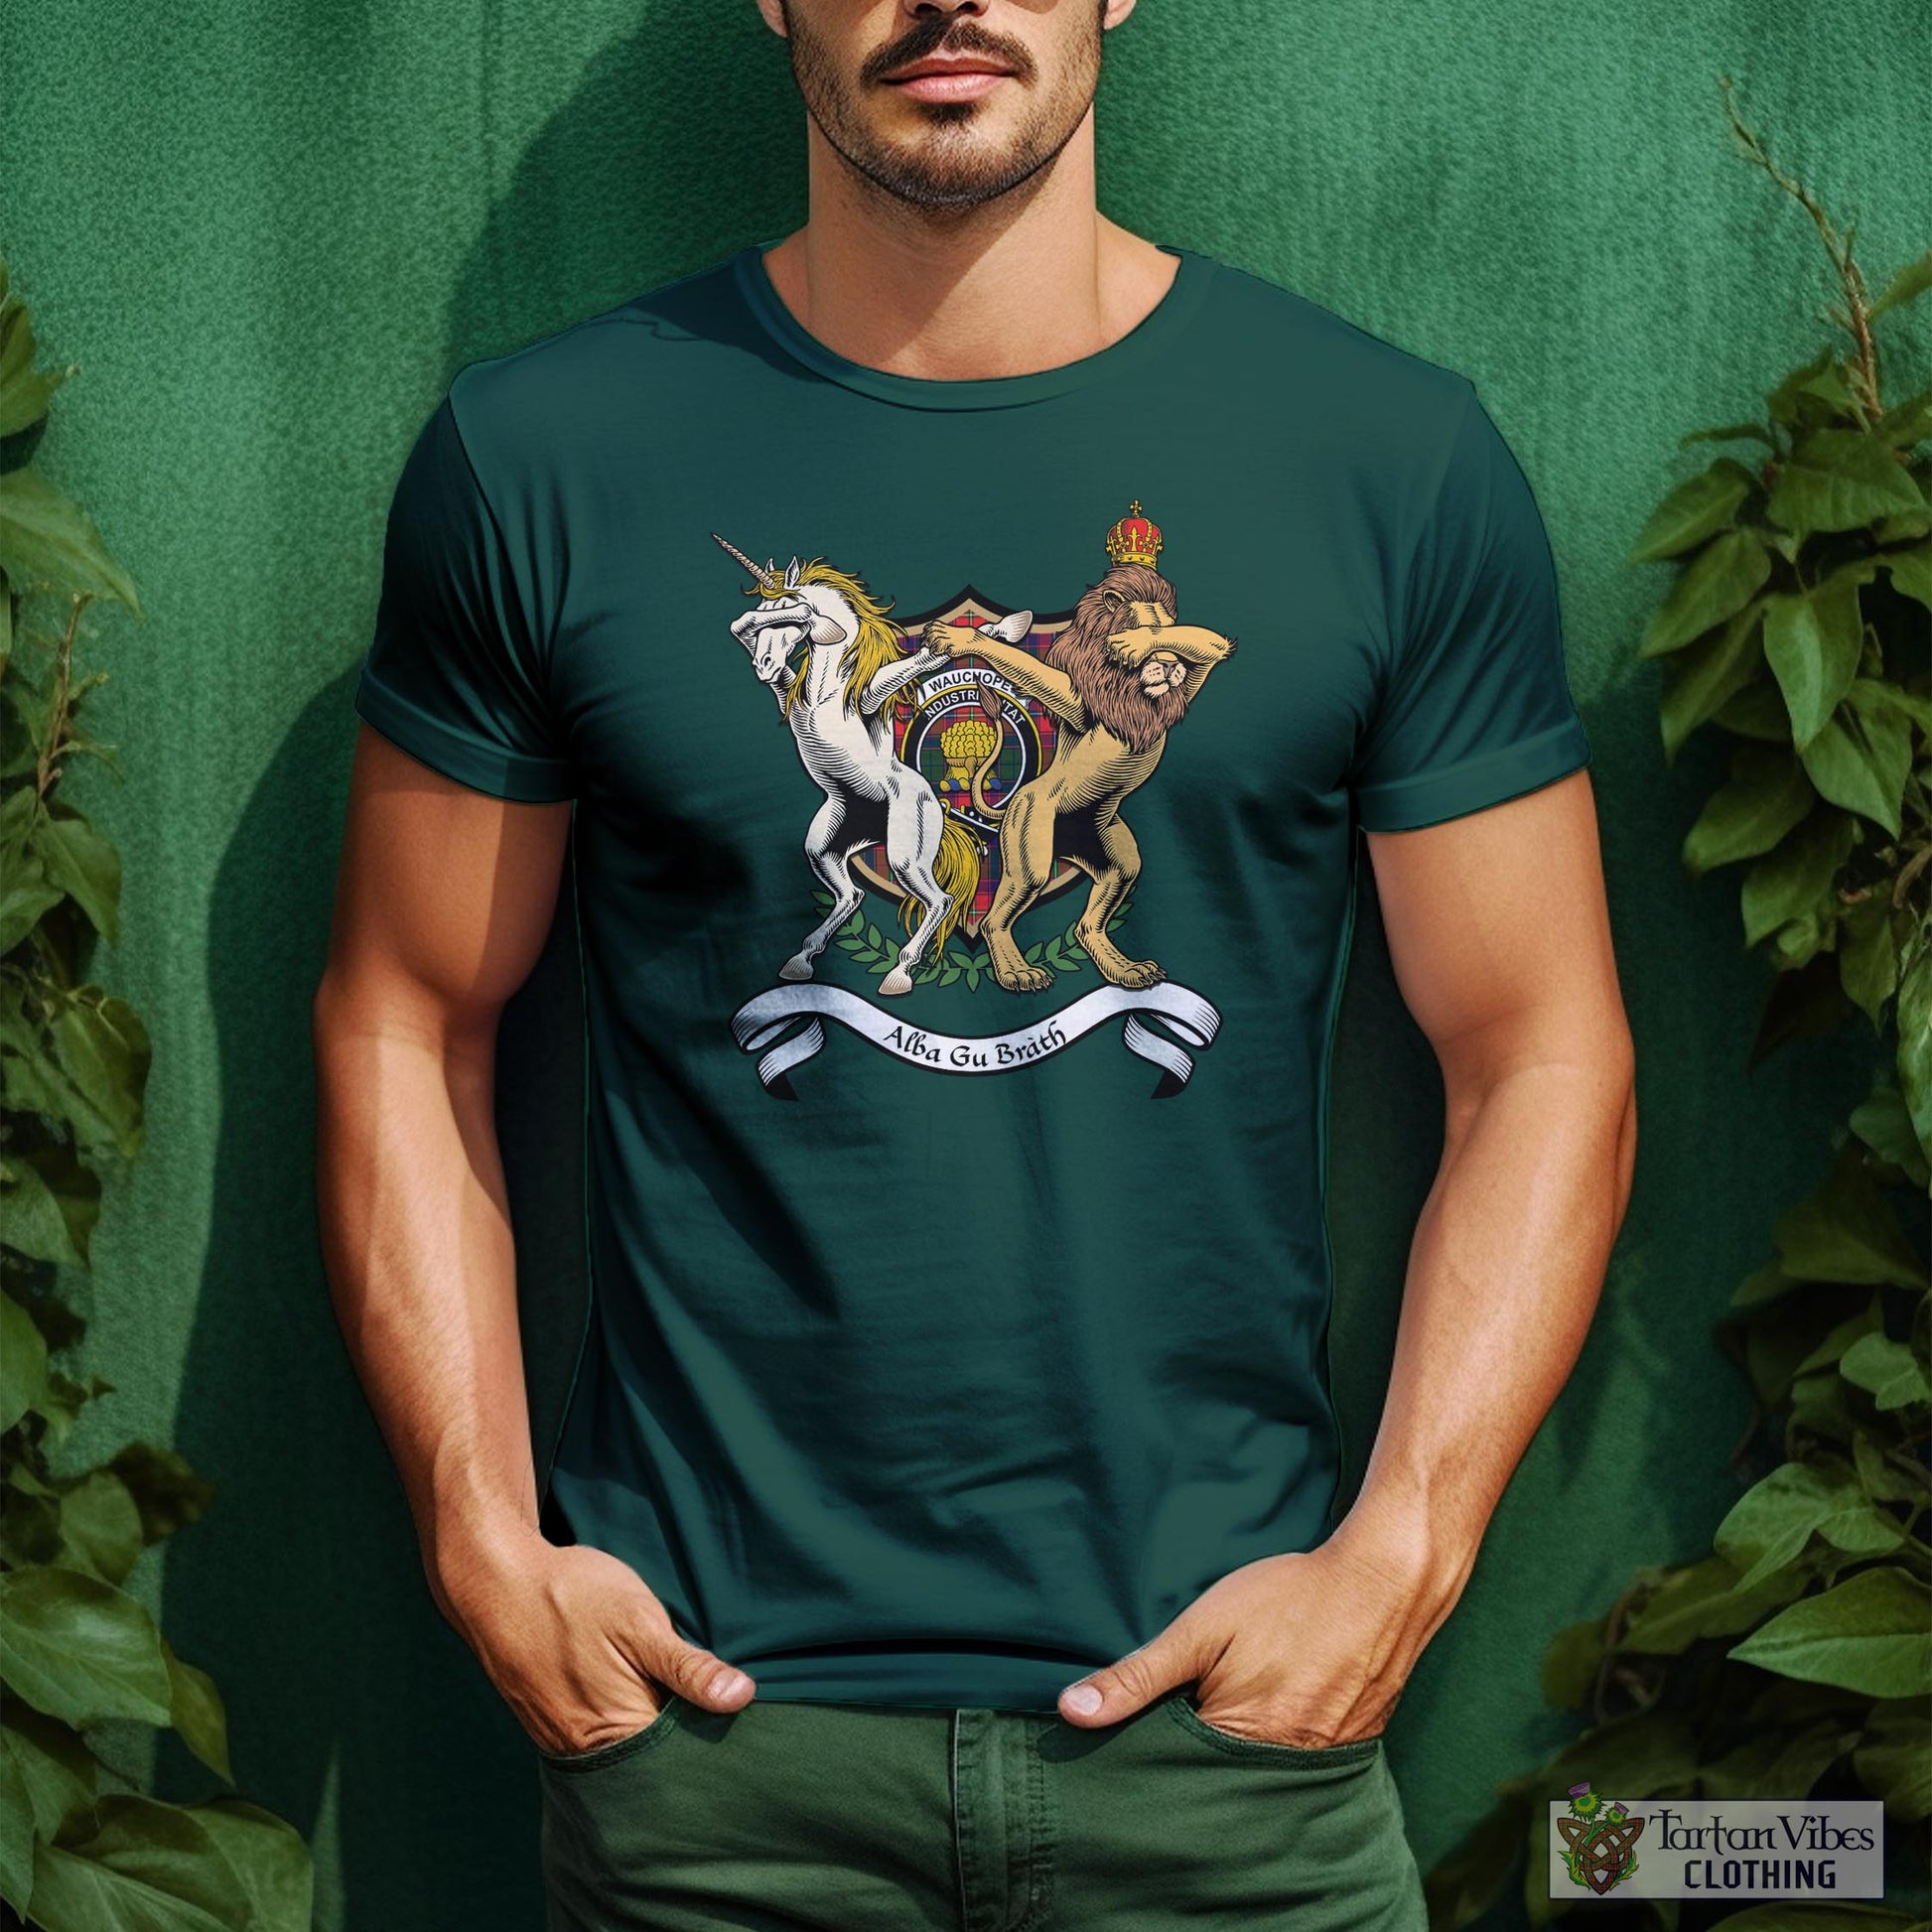 Tartan Vibes Clothing Wauchope Family Crest Cotton Men's T-Shirt with Scotland Royal Coat Of Arm Funny Style